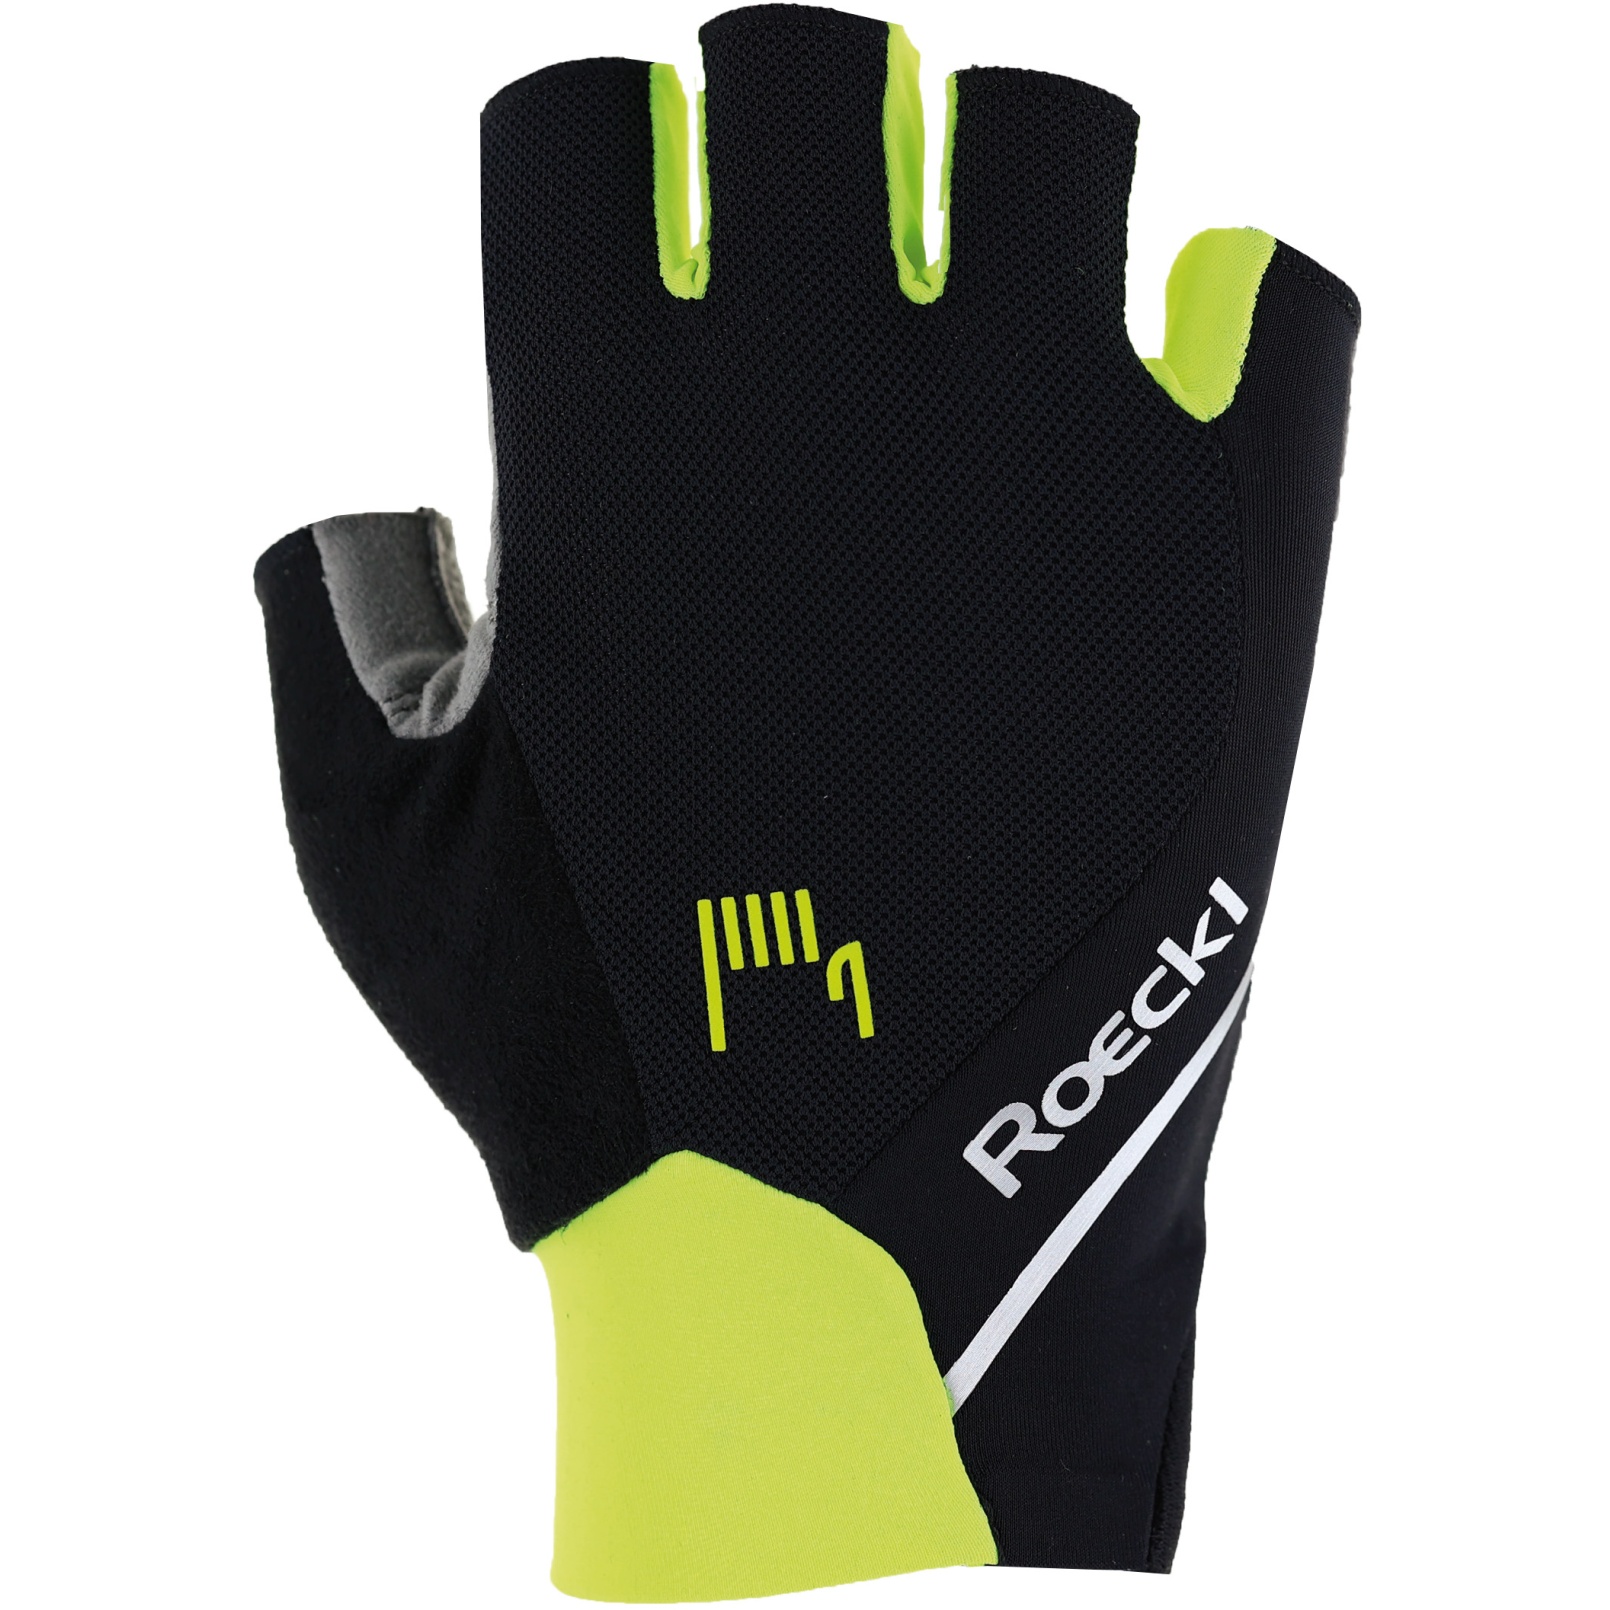 Picture of Roeckl Sports Ivory 2 Cycling Gloves - black/fluo yellow 9210